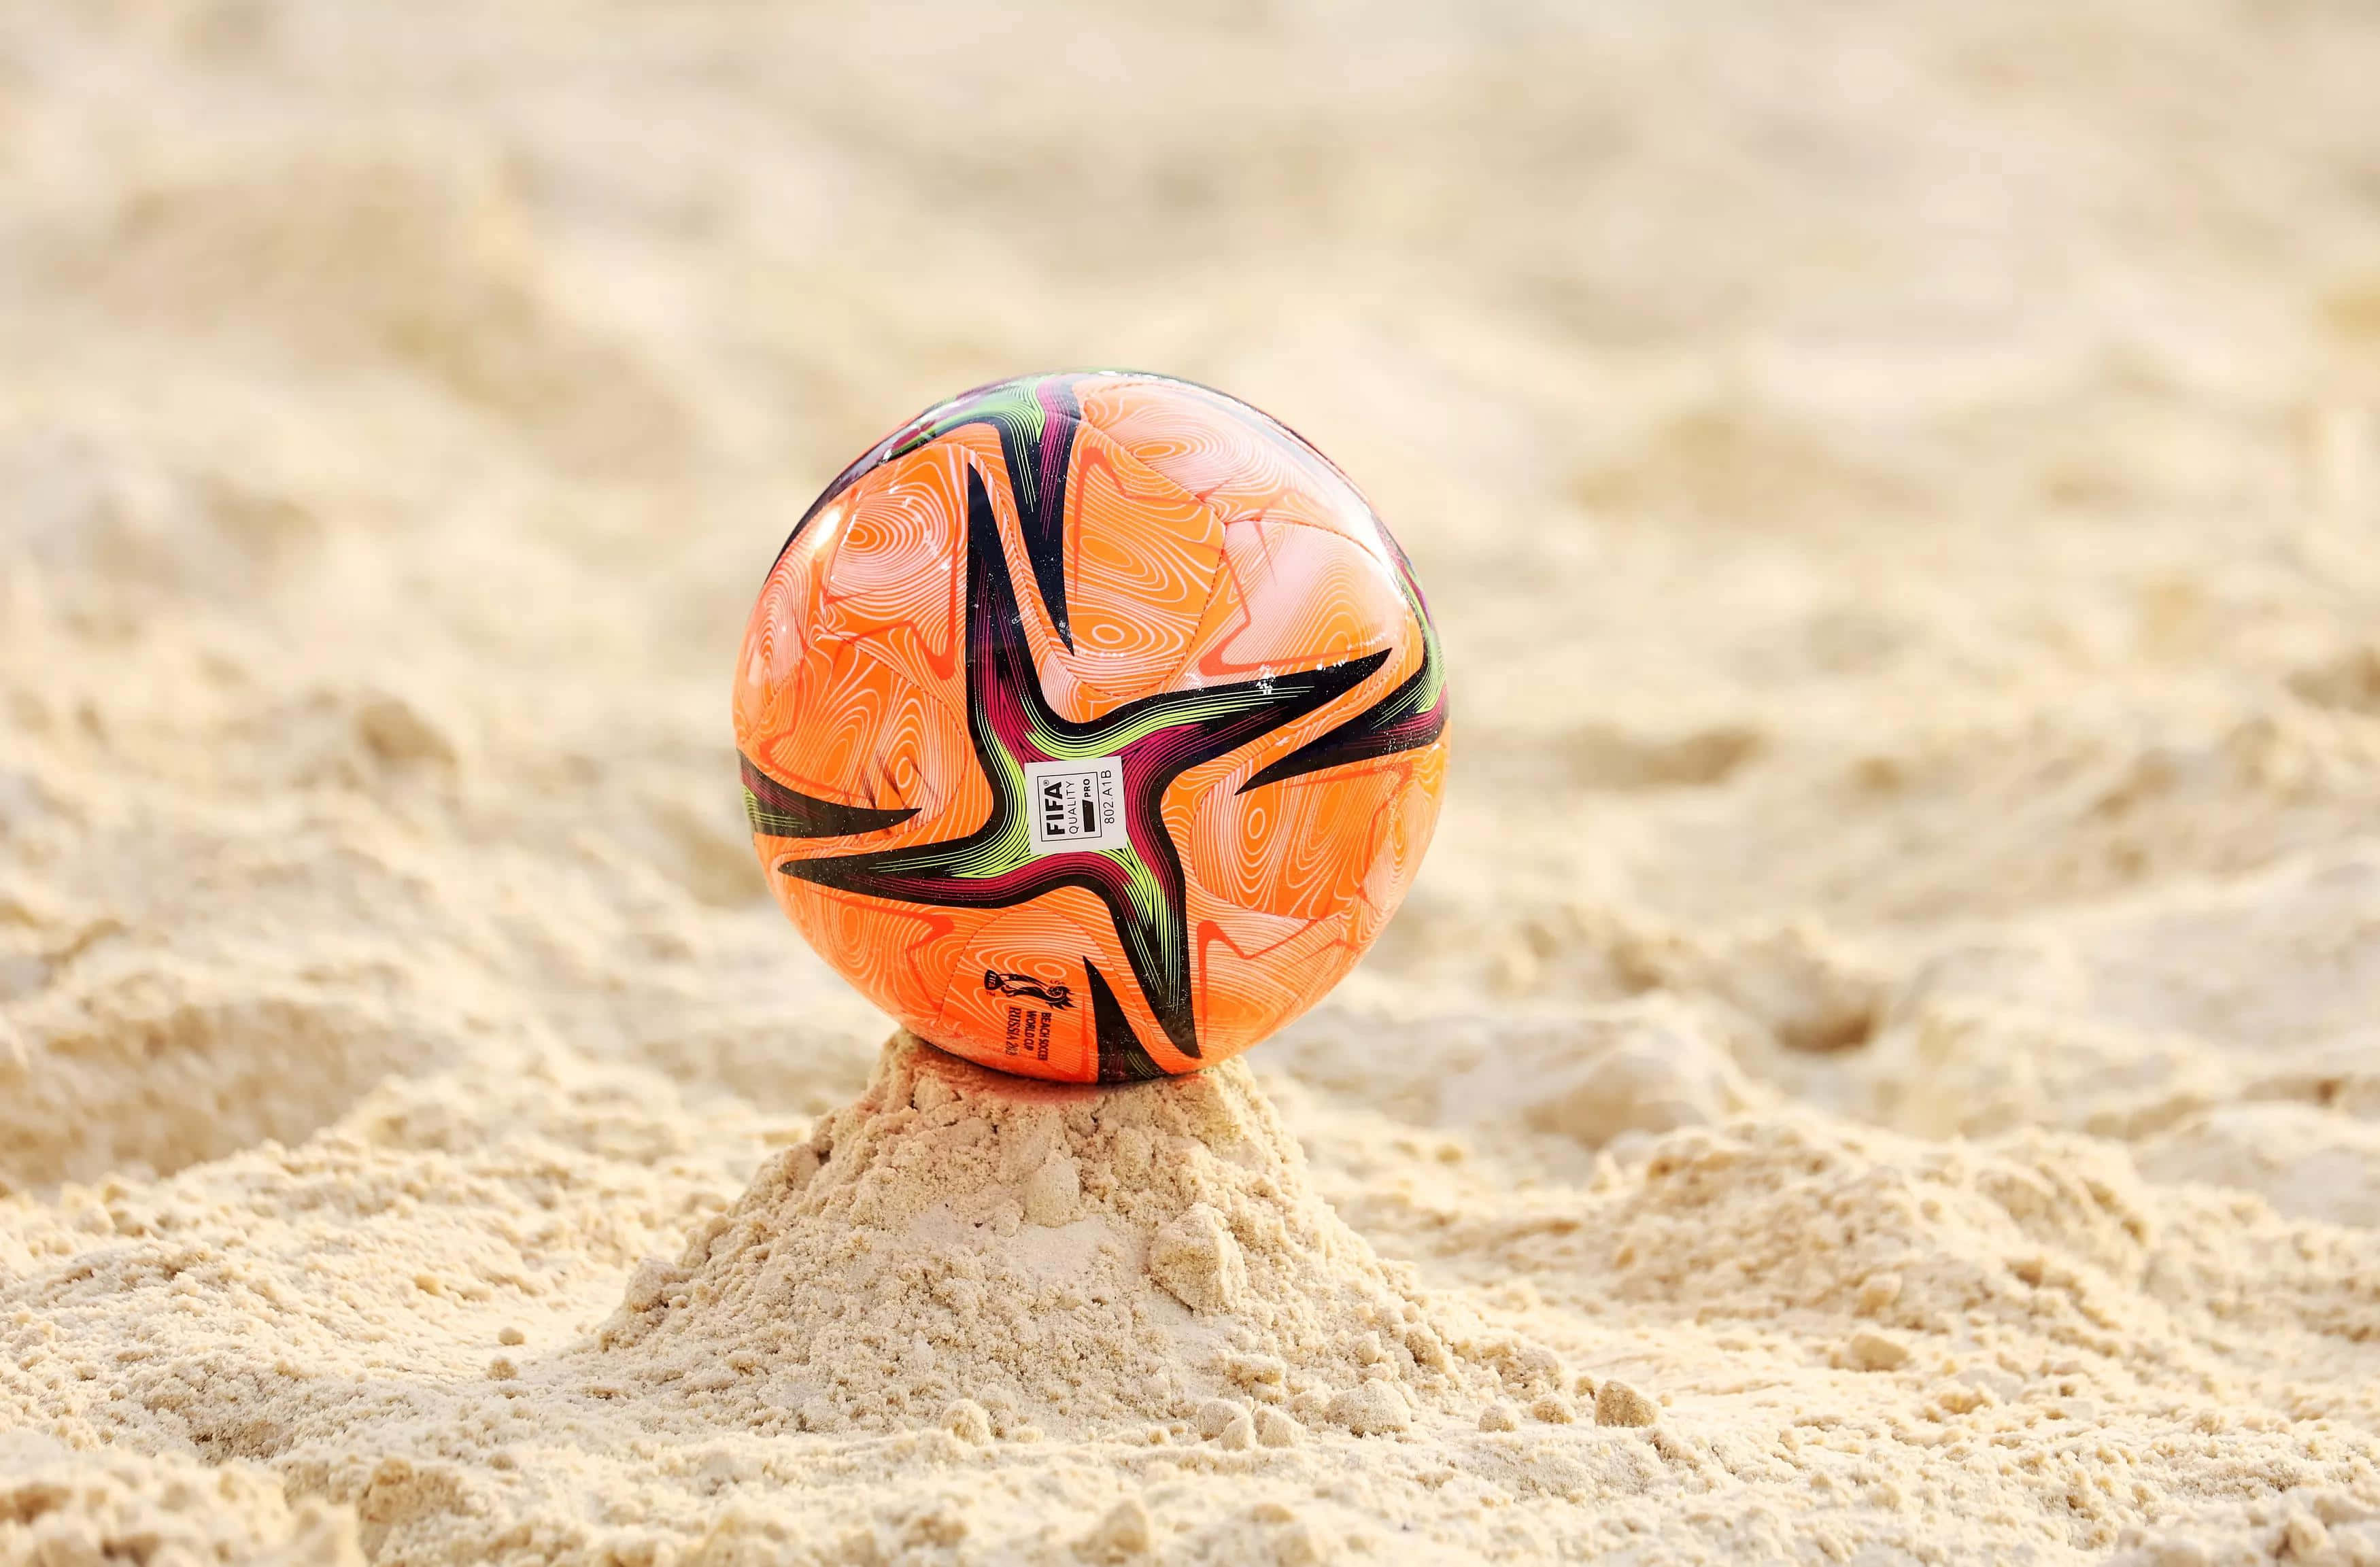 Energetic Beach Soccer Game In Action Wallpaper